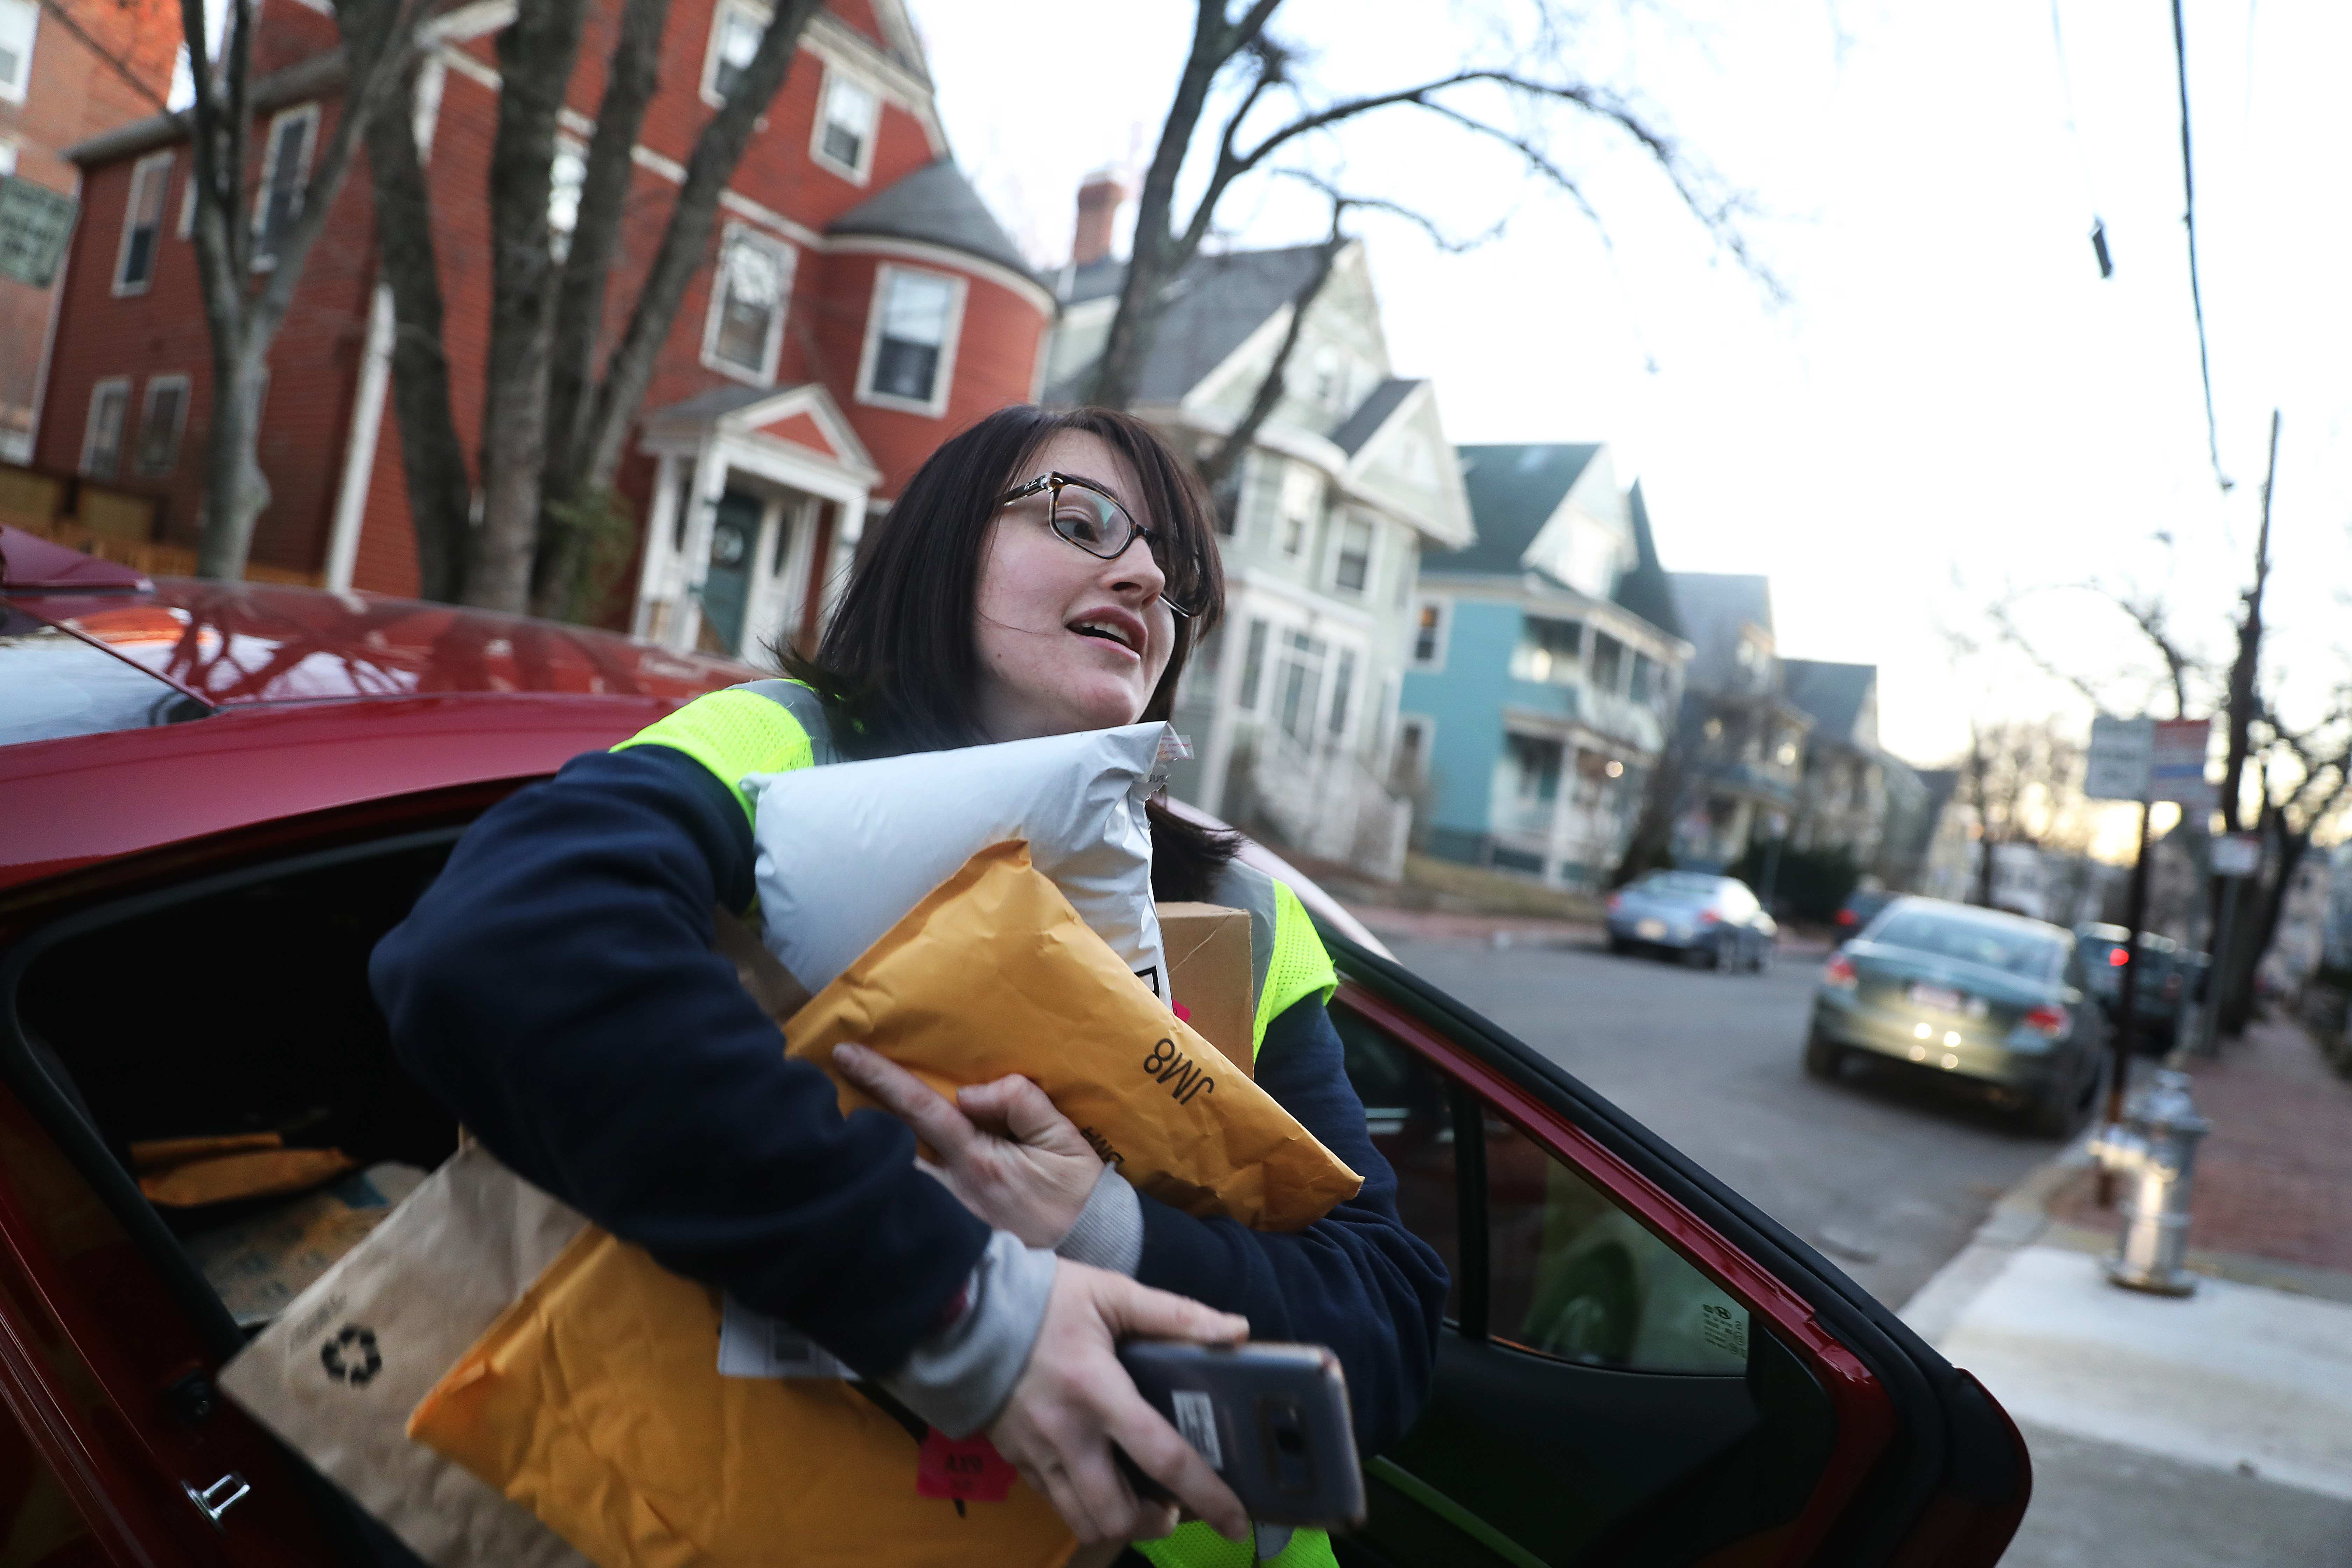 A woman gets out of her car with her arms full of packages.